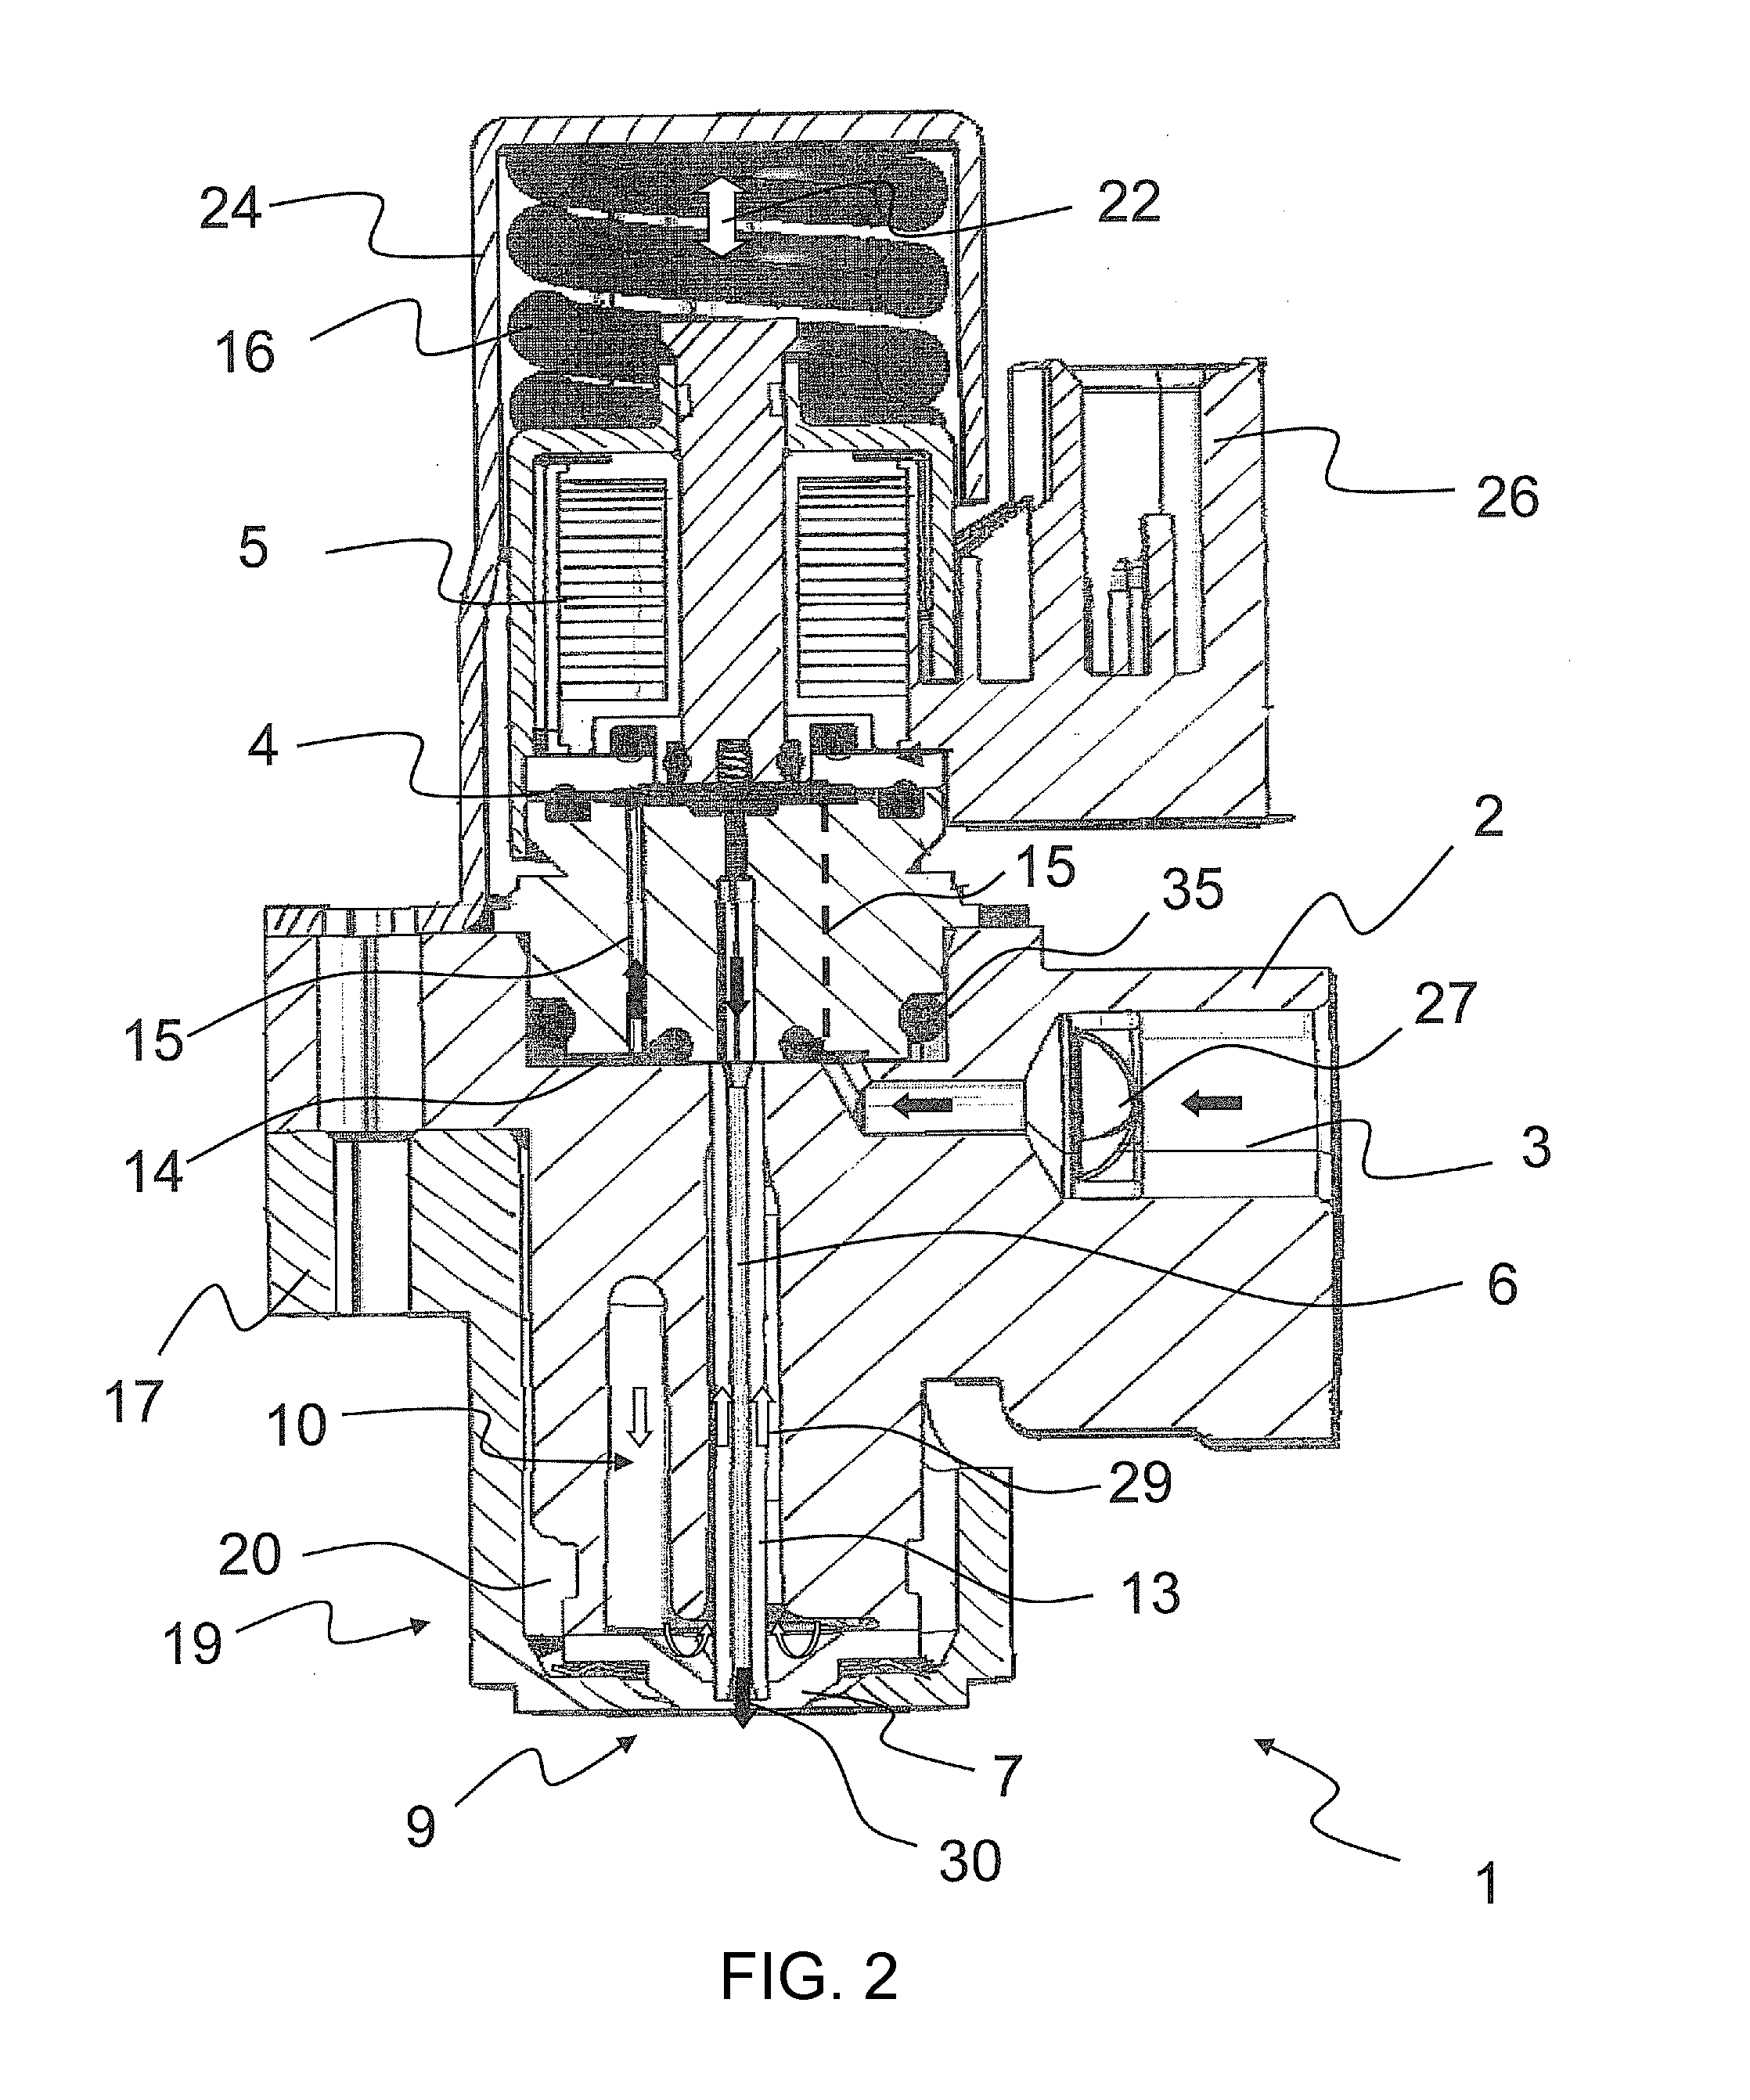 Injector for a urea-water solution